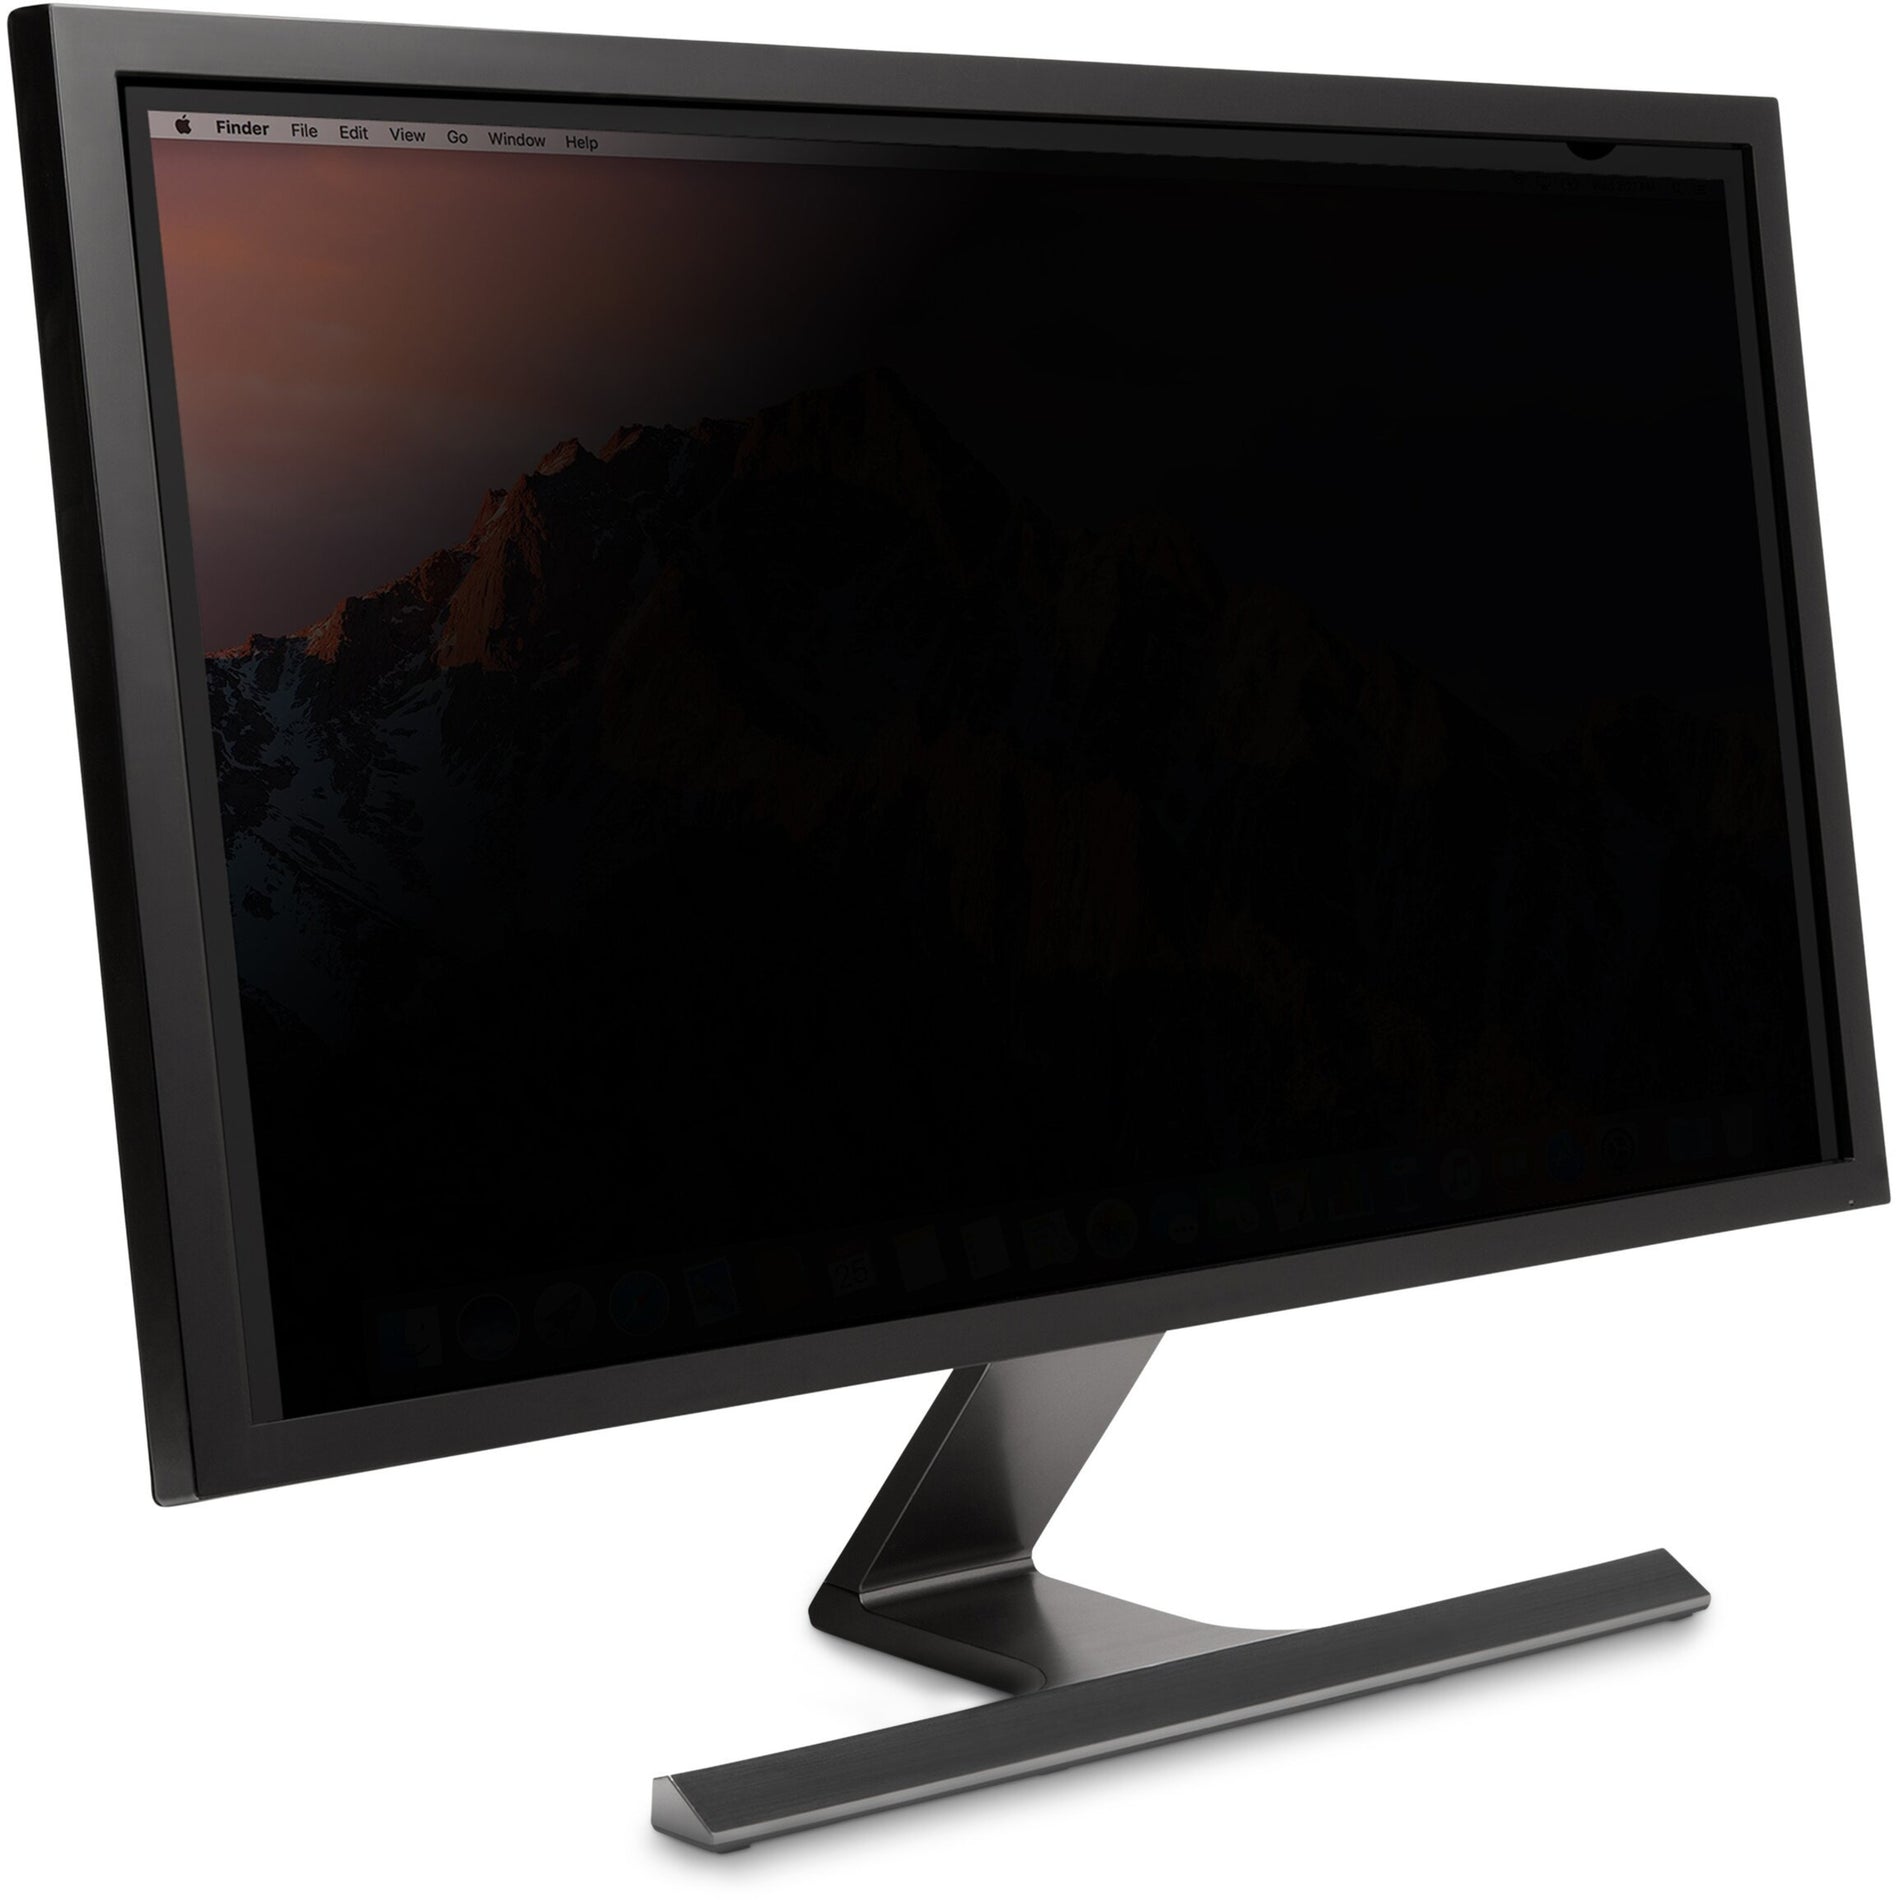 Kensington K52115WW FP315W9 Privacy Screen for Monitors (31.5" 16:9), Protect Your Privacy and Confidential Information